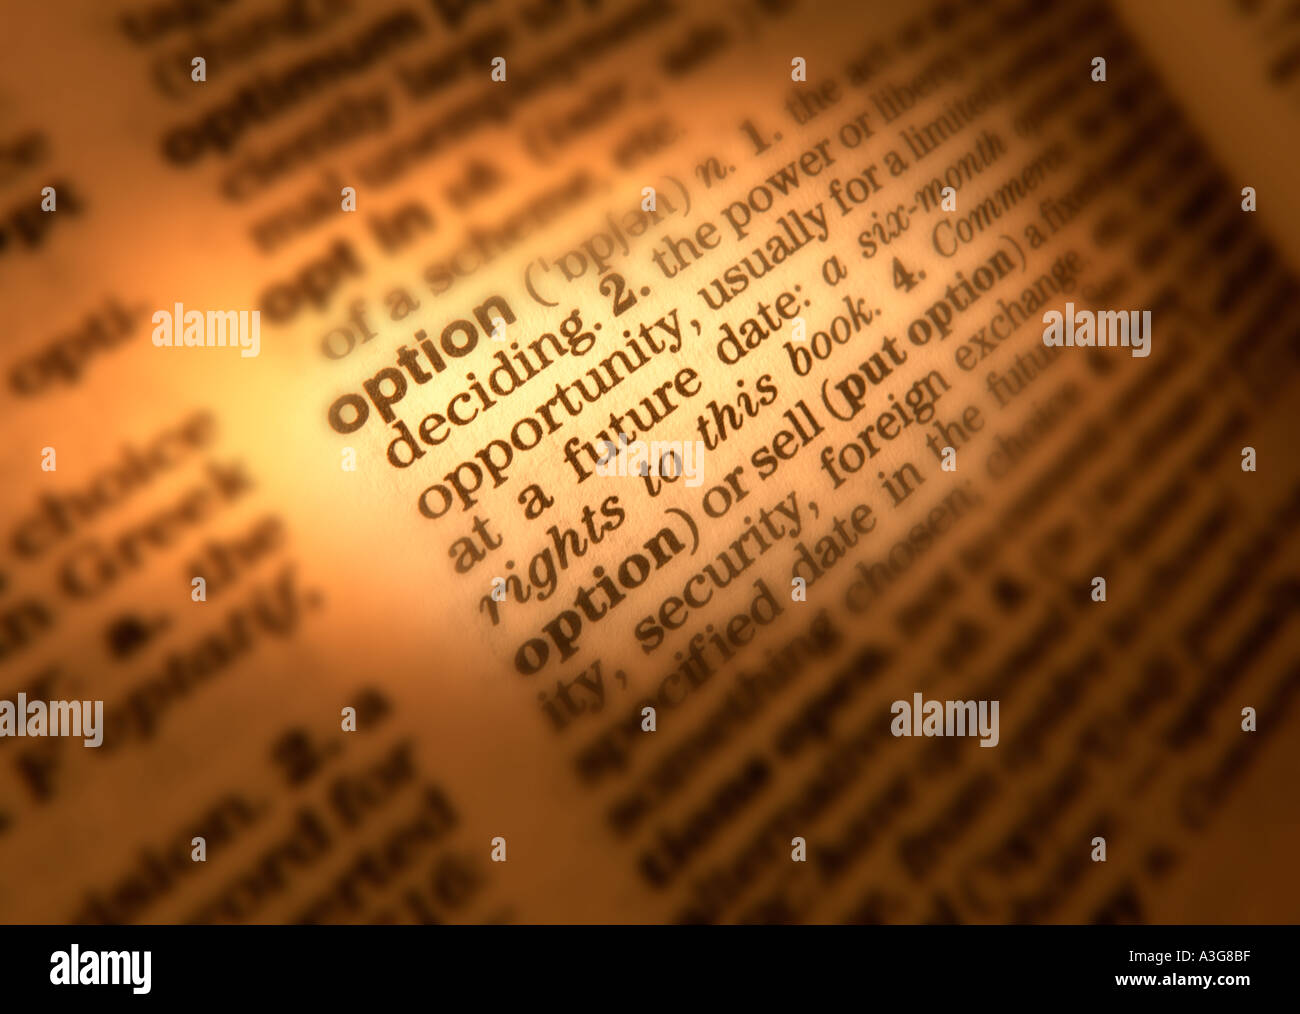 CLOSE UP OF DICTIONARY PAGE SHOWING DEFINITION OF THE WORD OPTION Stock Photo